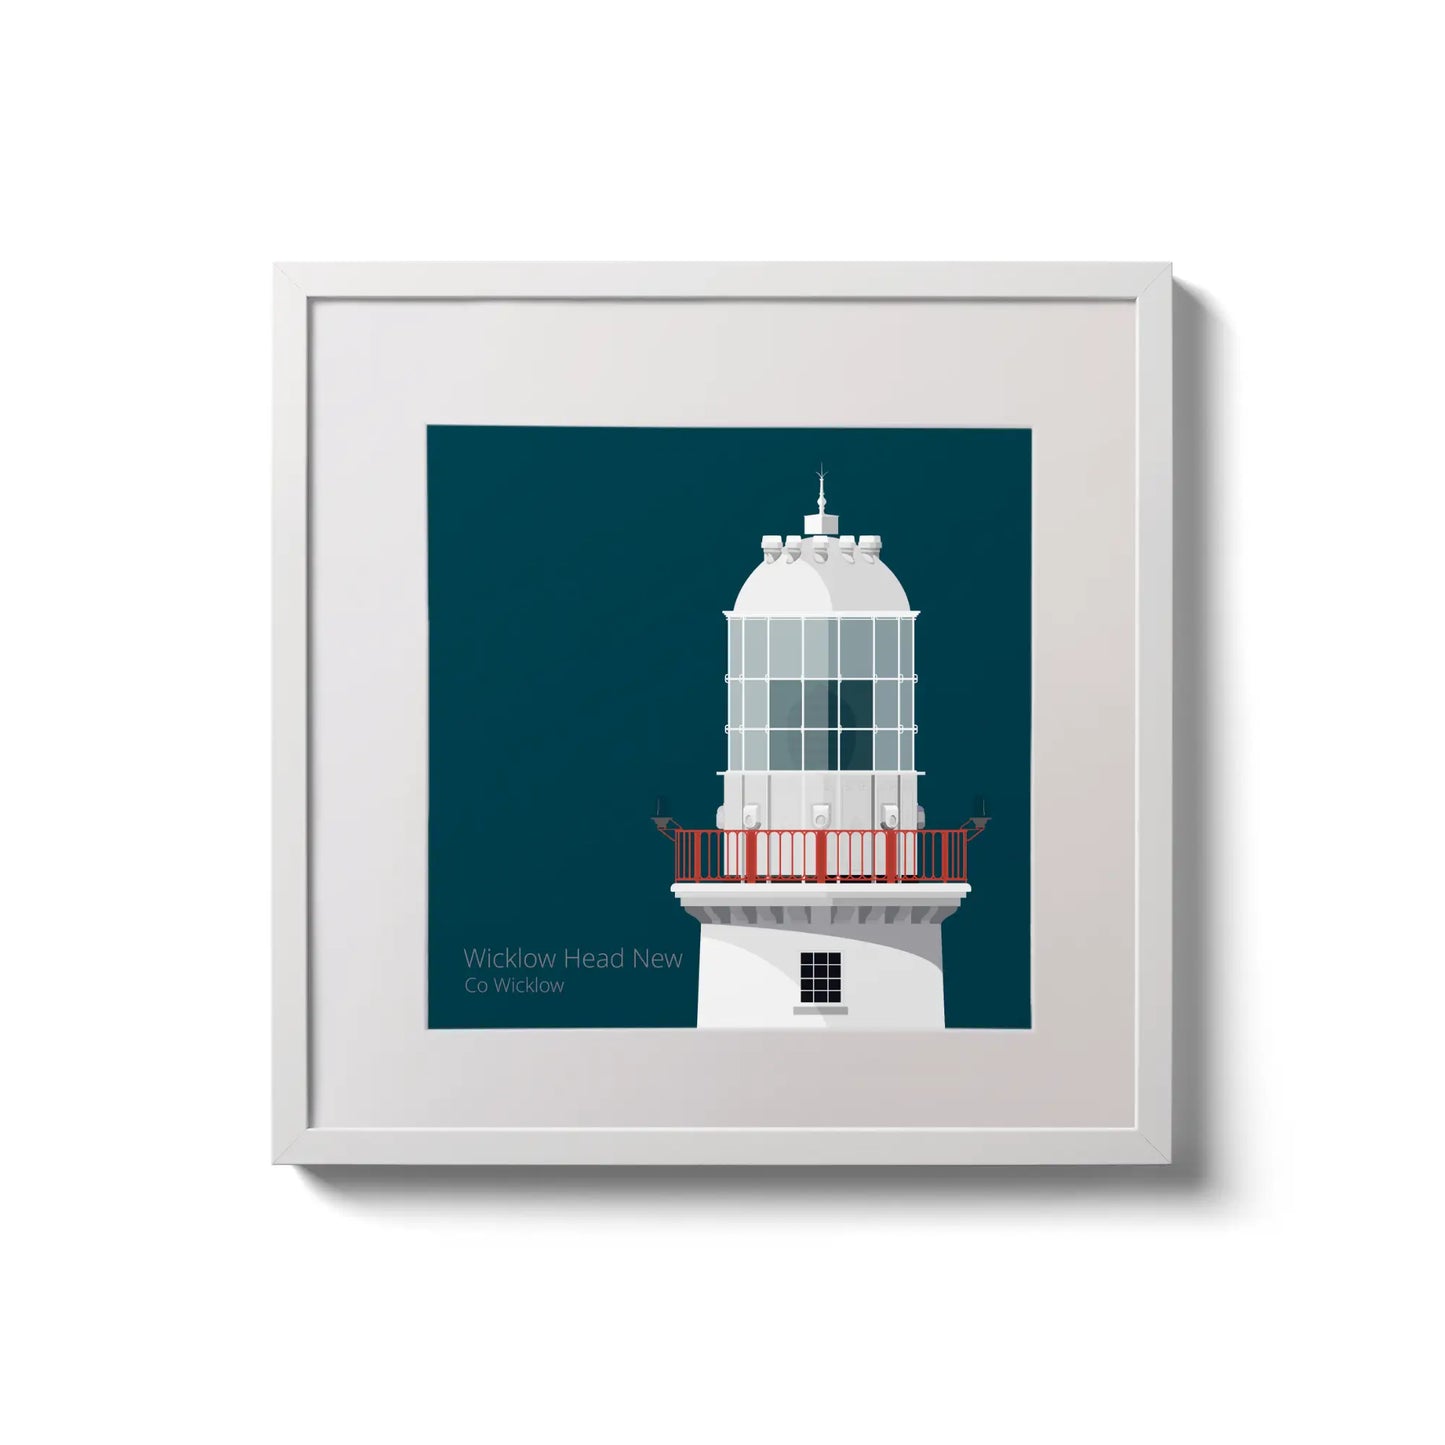 Illustration of Valentia Island lighthouse on a midnight blue background,  in a white square frame measuring 20x20cm.